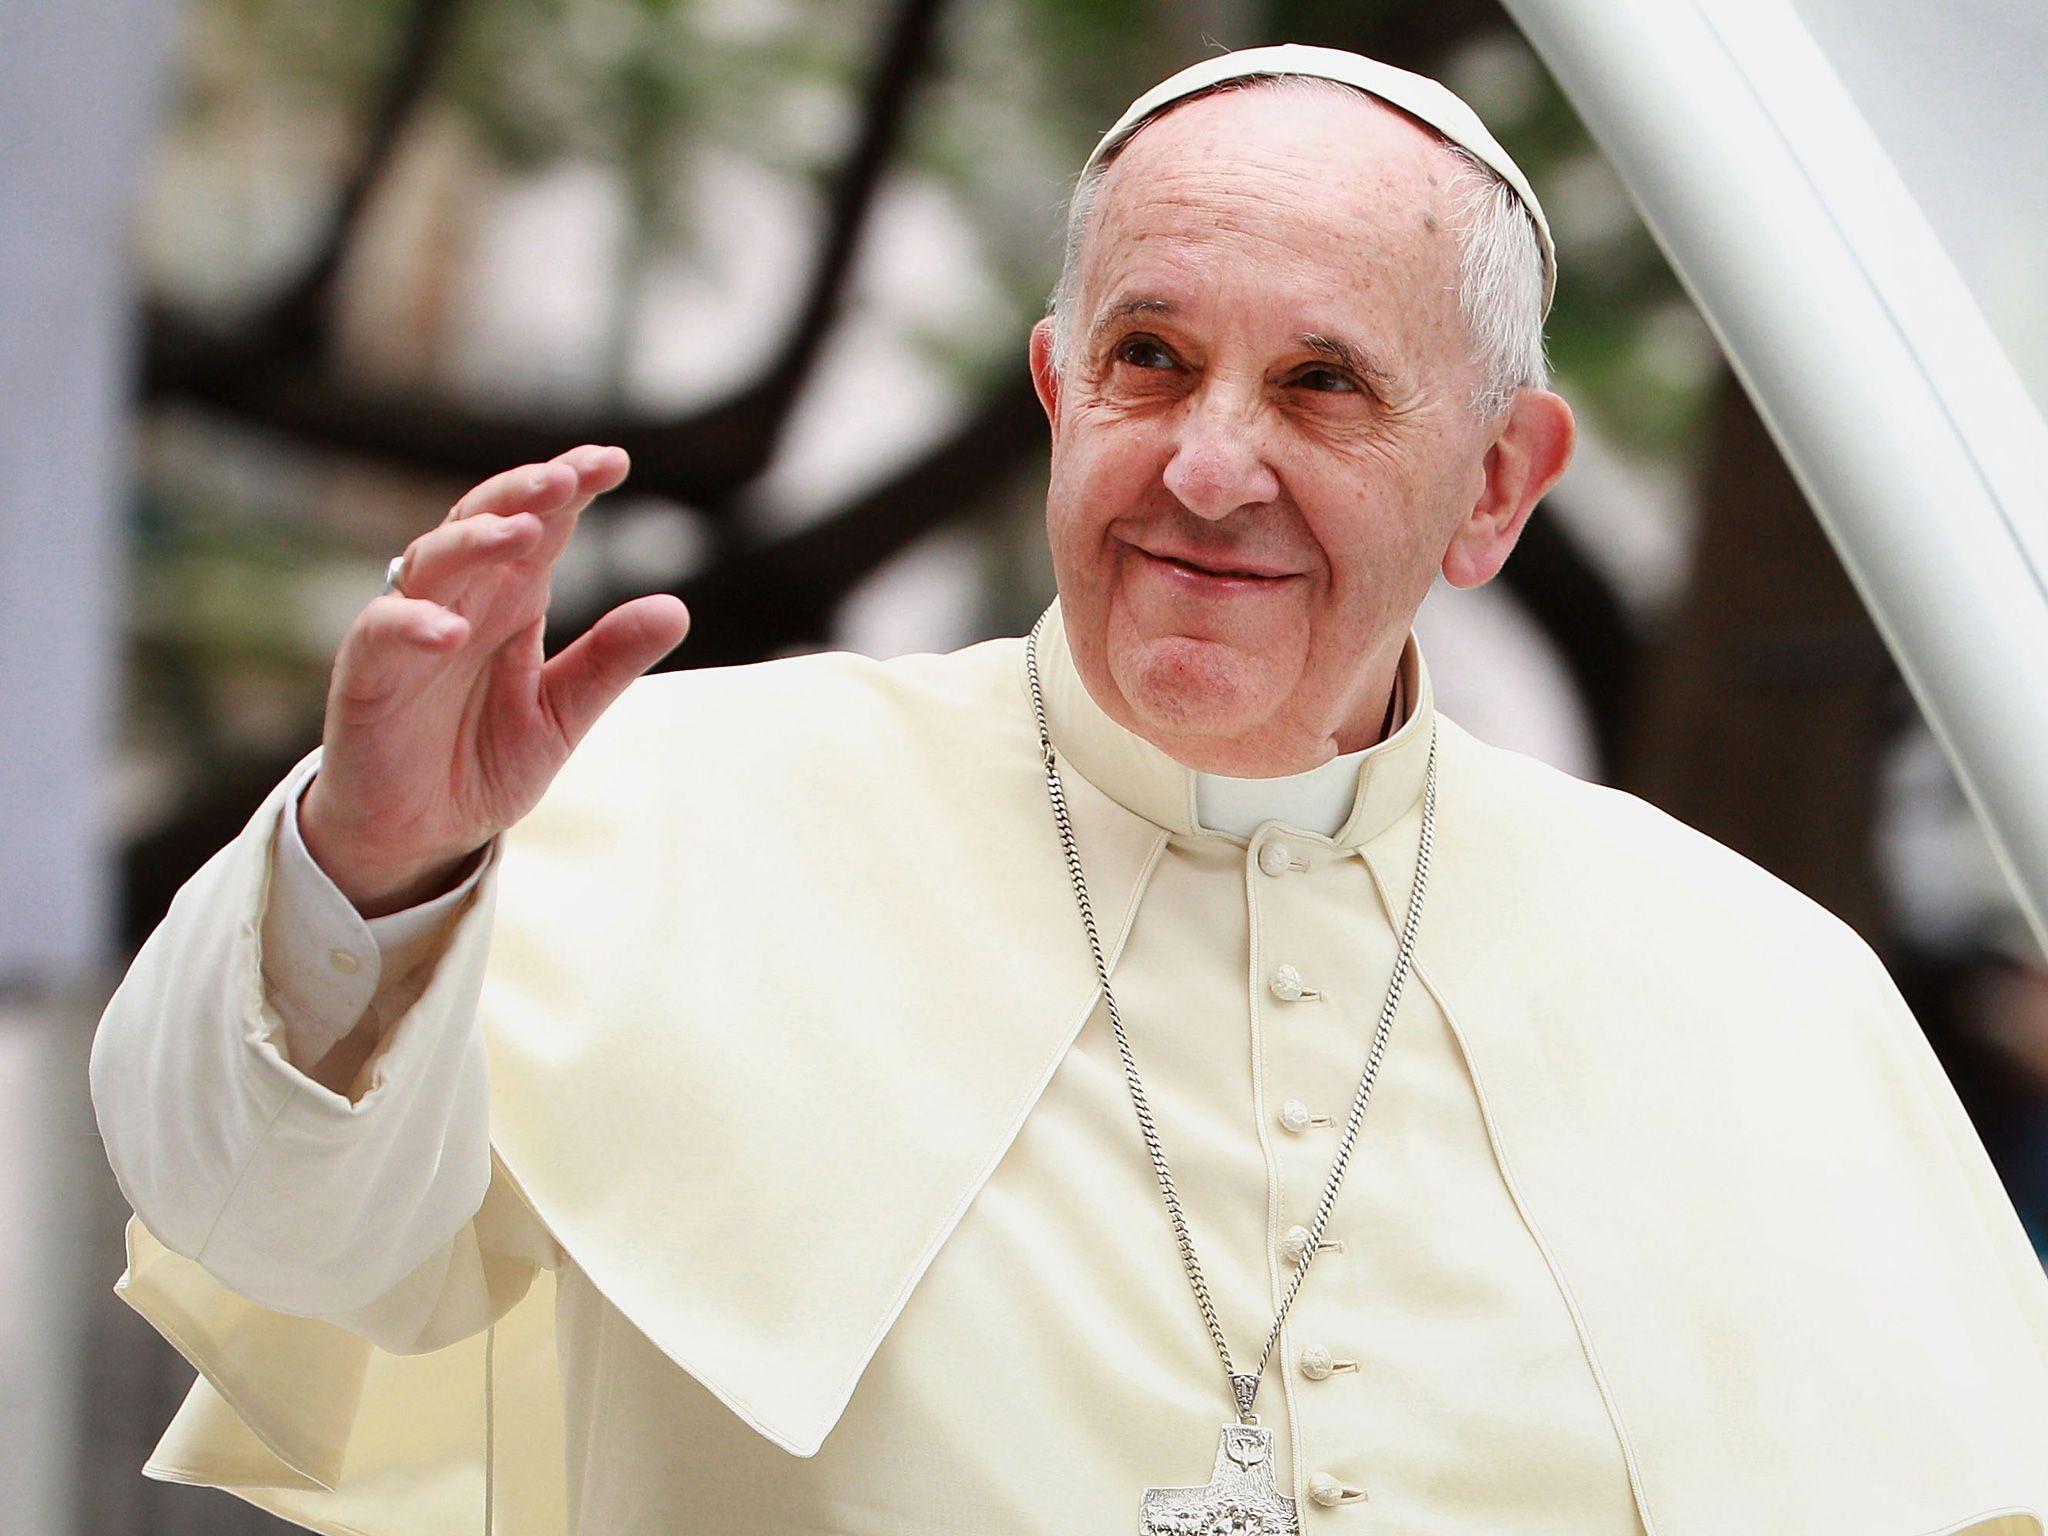 How to See the Pope in New York City